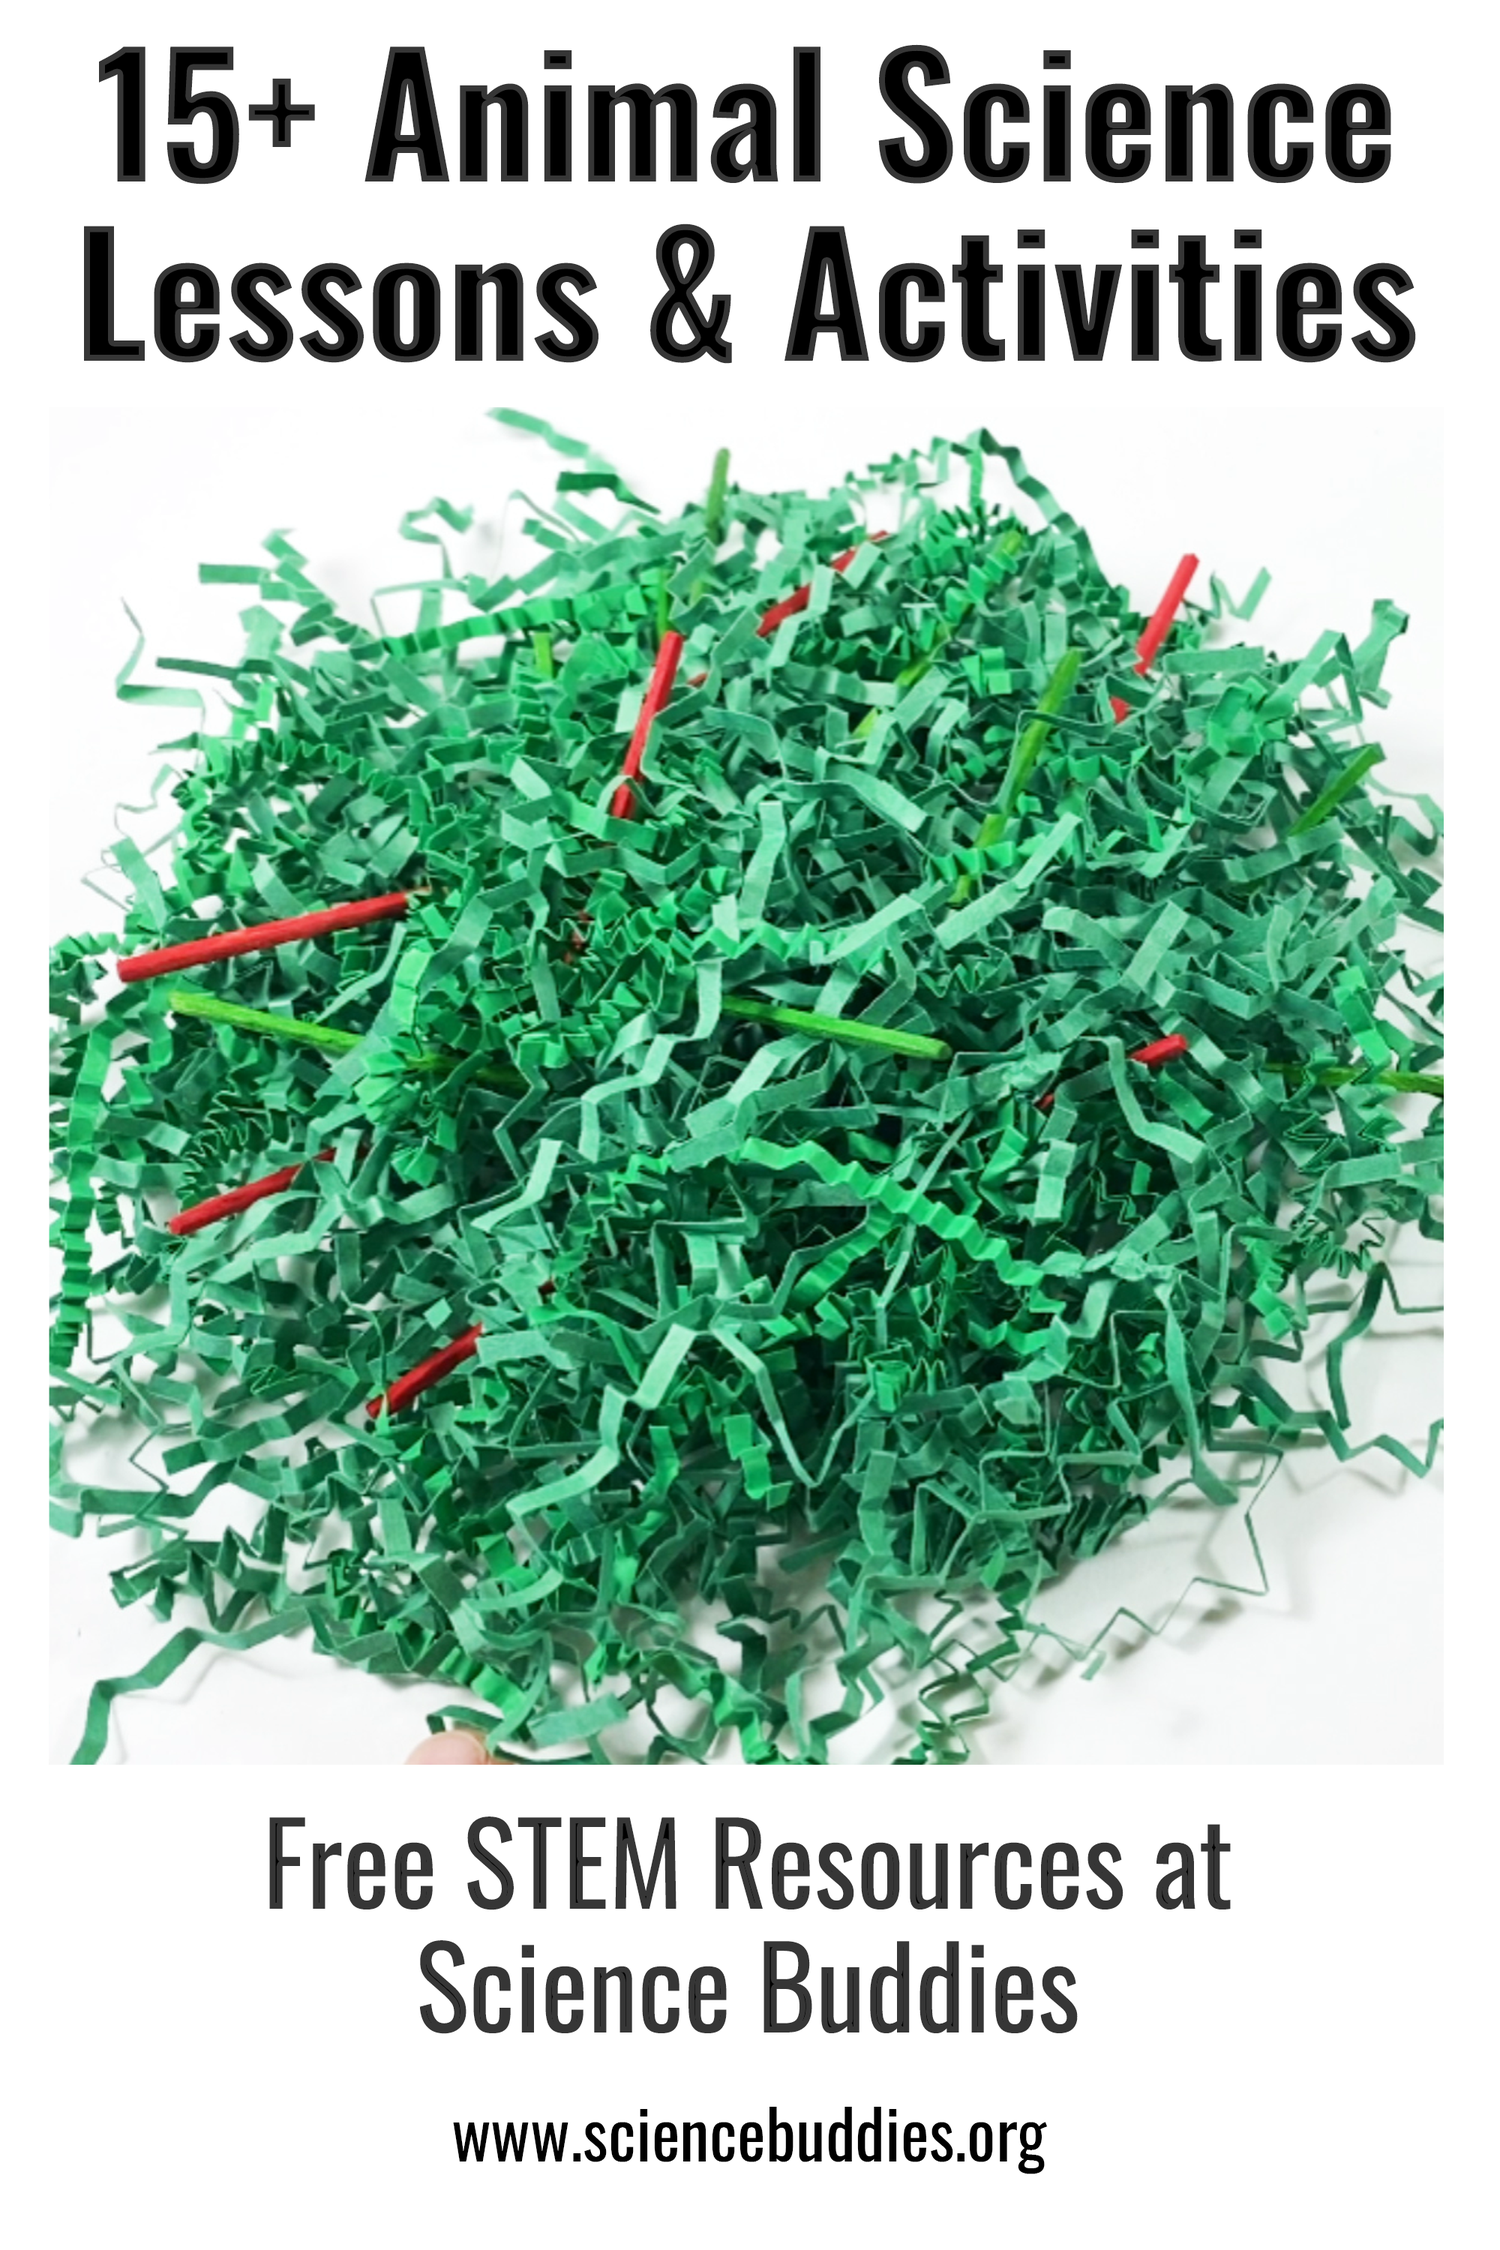 Colorful green paper shred with green and red toothpicks, part of camouflage activity on animal science